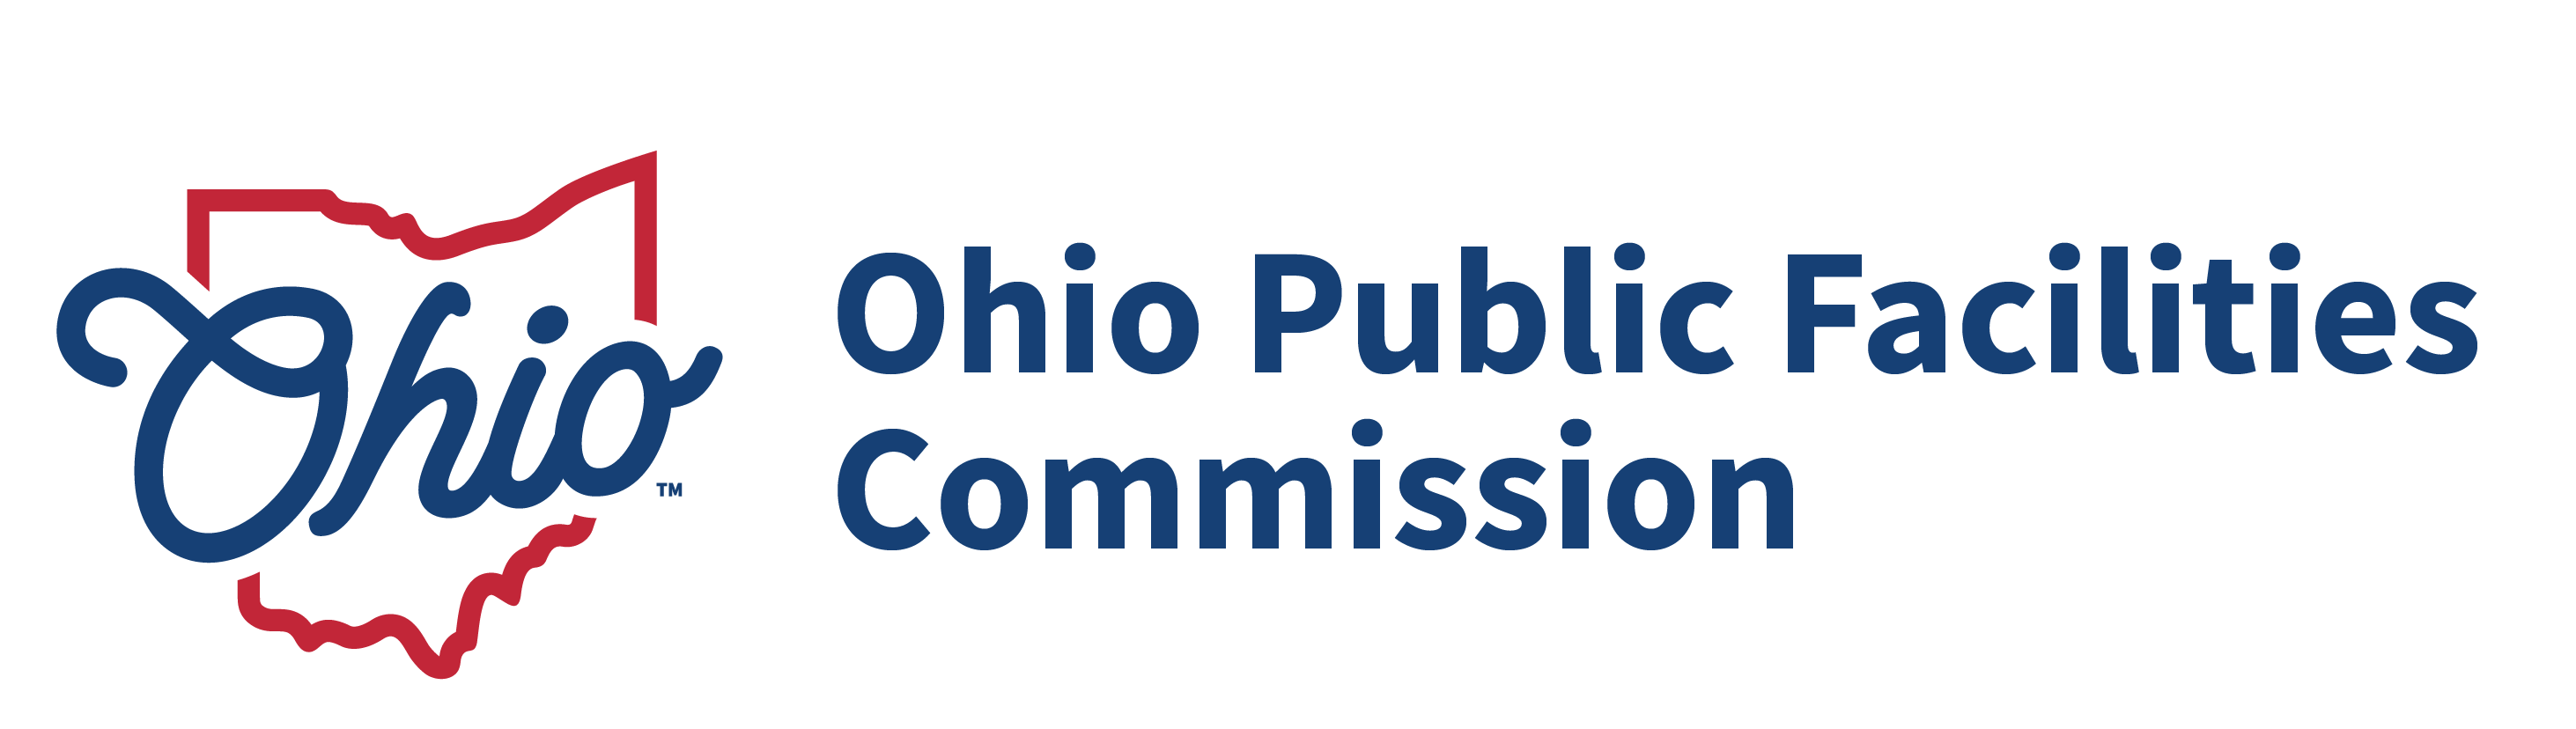 Ohio Public Facilities Commission - Official Seal or Logo